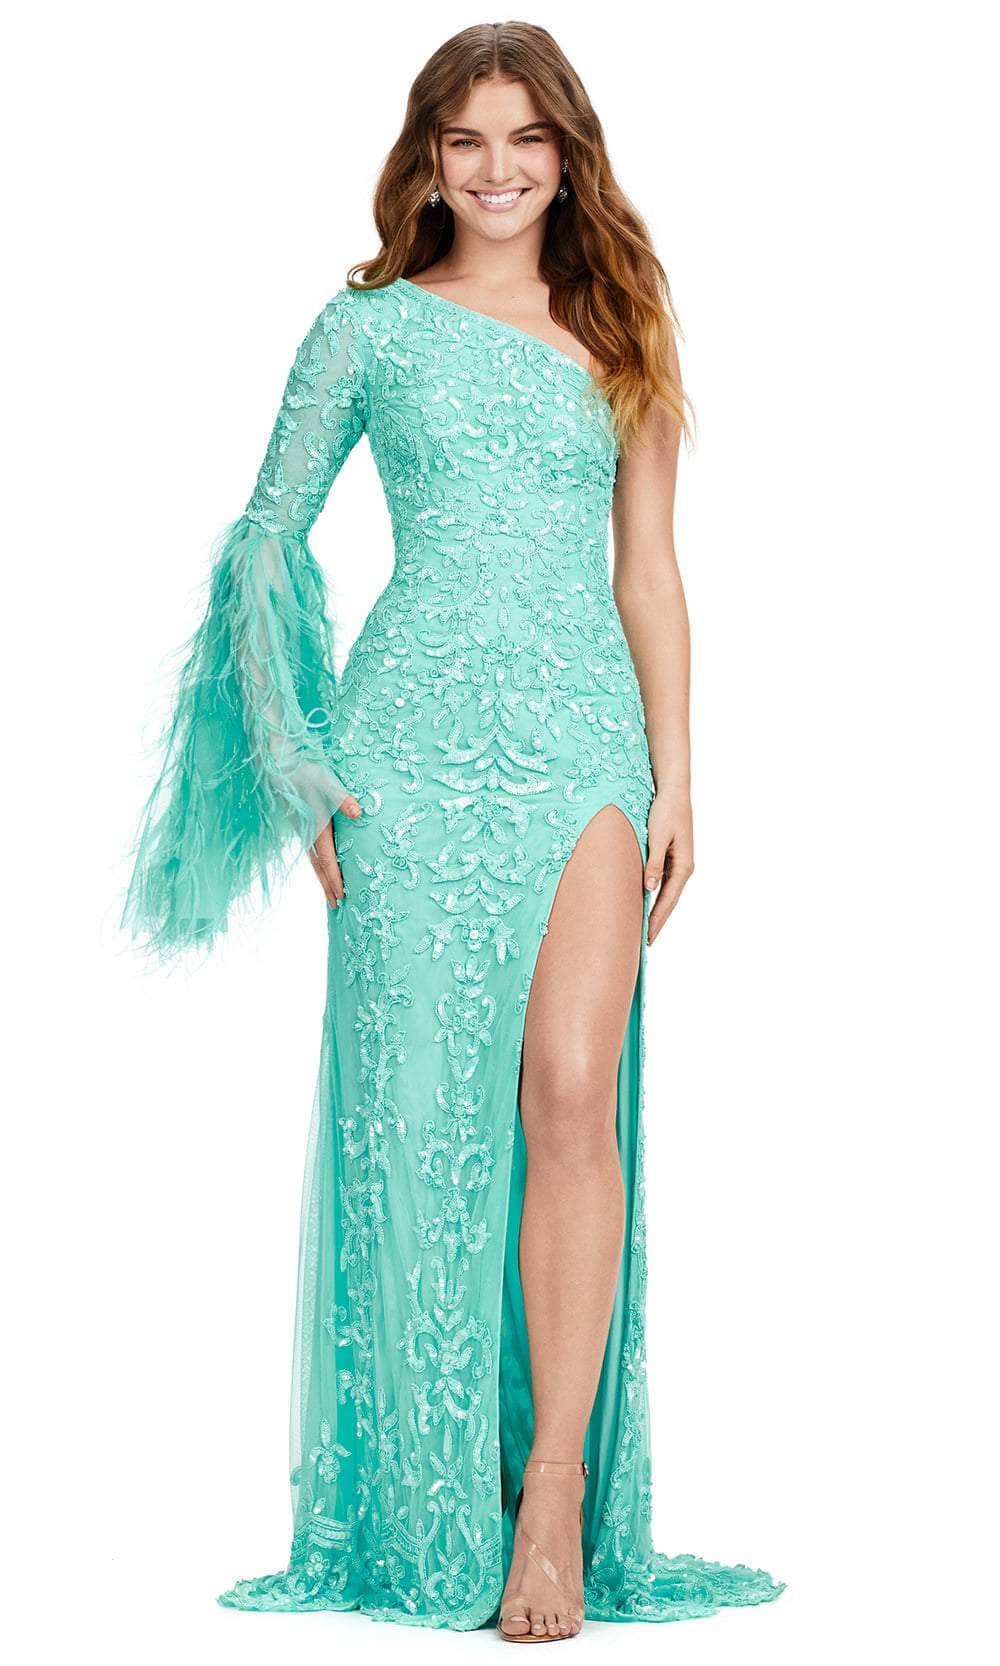 Image of Ashley Lauren 11452 - Feather Bell Sleeve Prom Dress